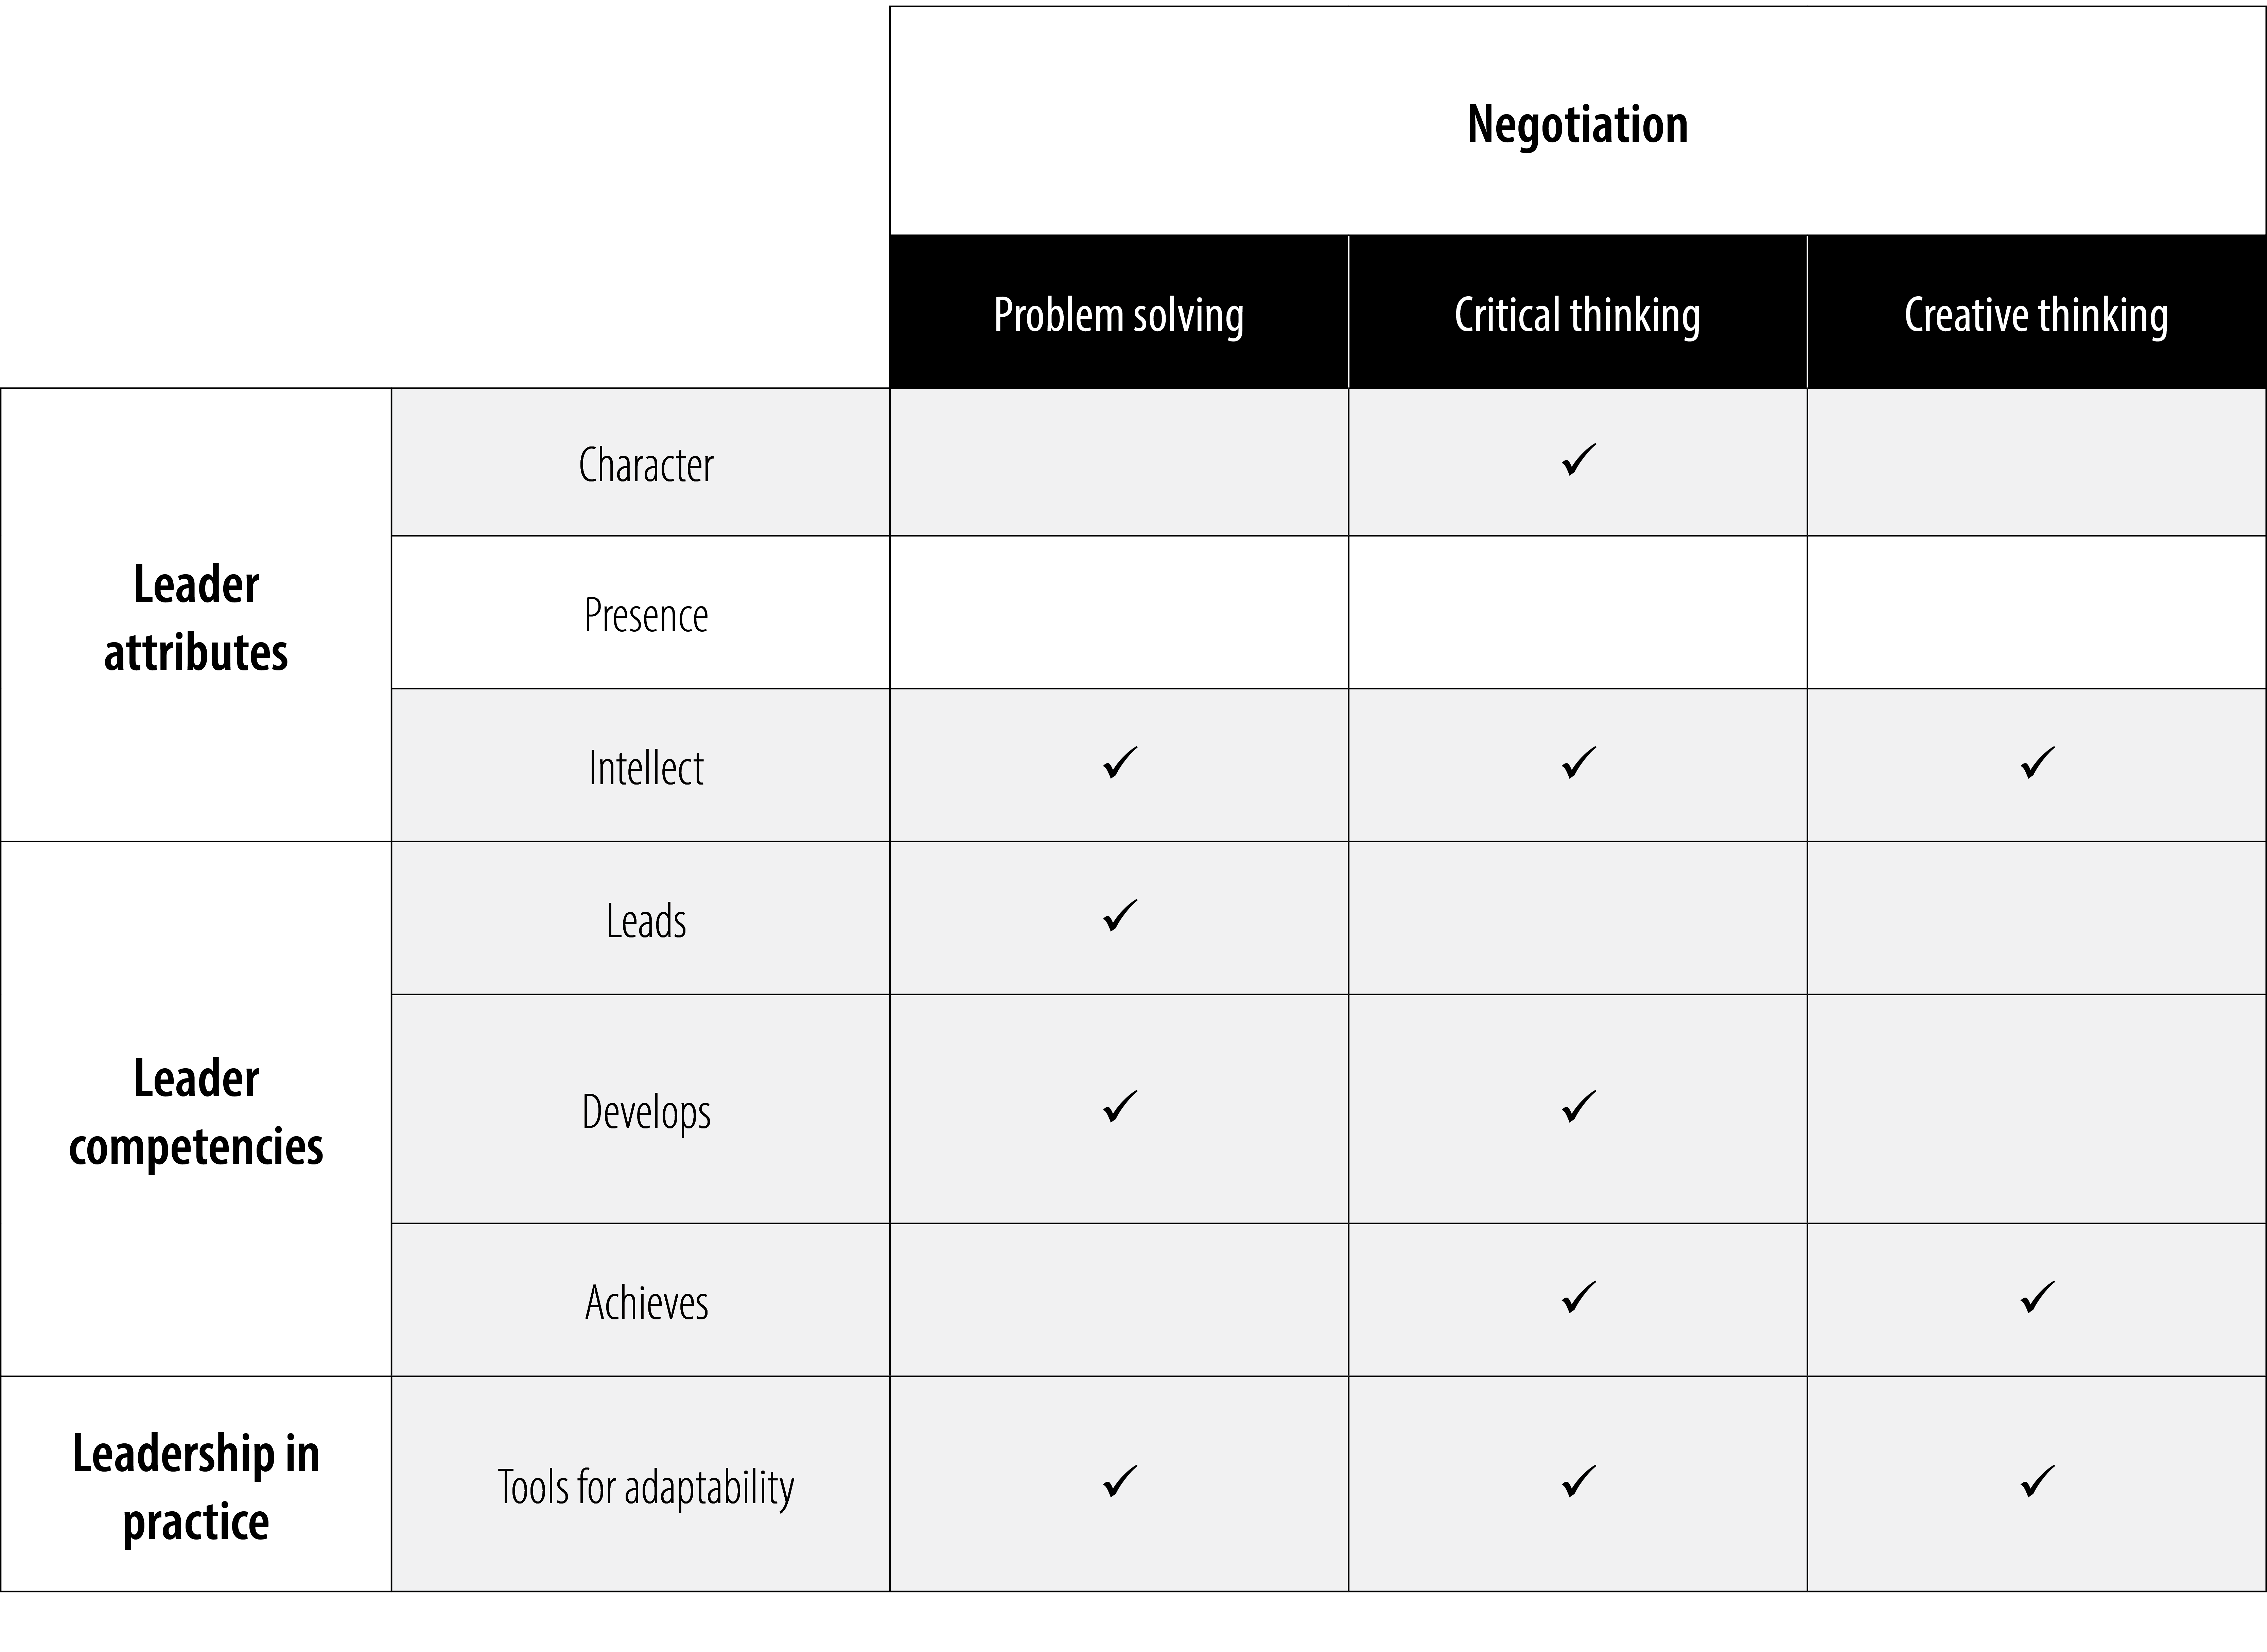 Table 1. Negotiation Expanded Definition: Word Associations in Army Leadership (Table by Nick Tallant)